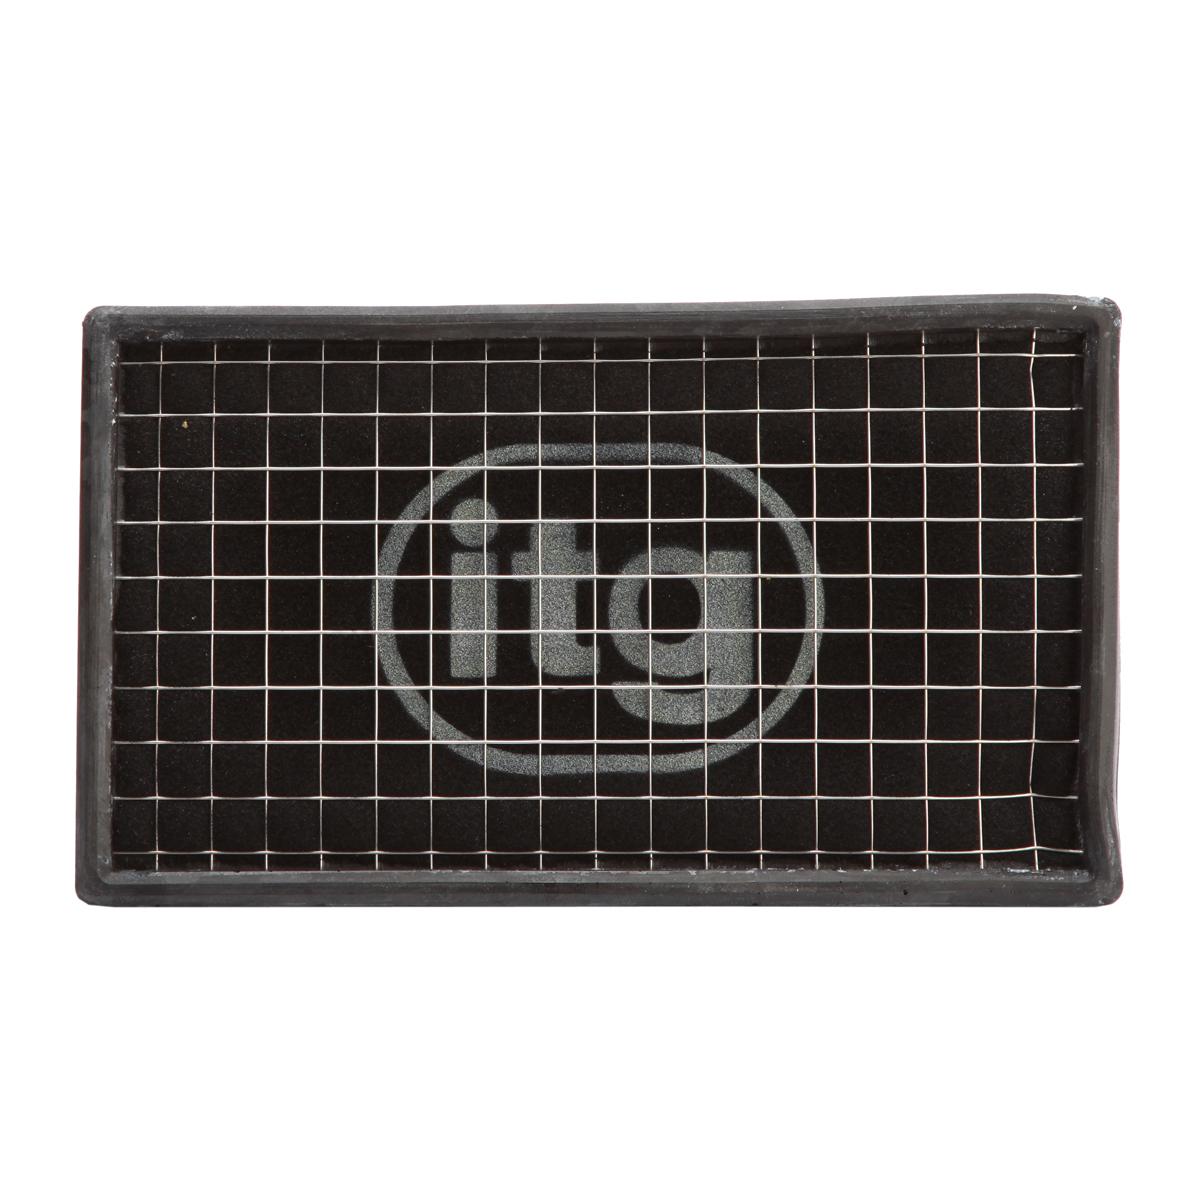 ITG Air Filter For BMW 528I E28 (09/85>11/87)